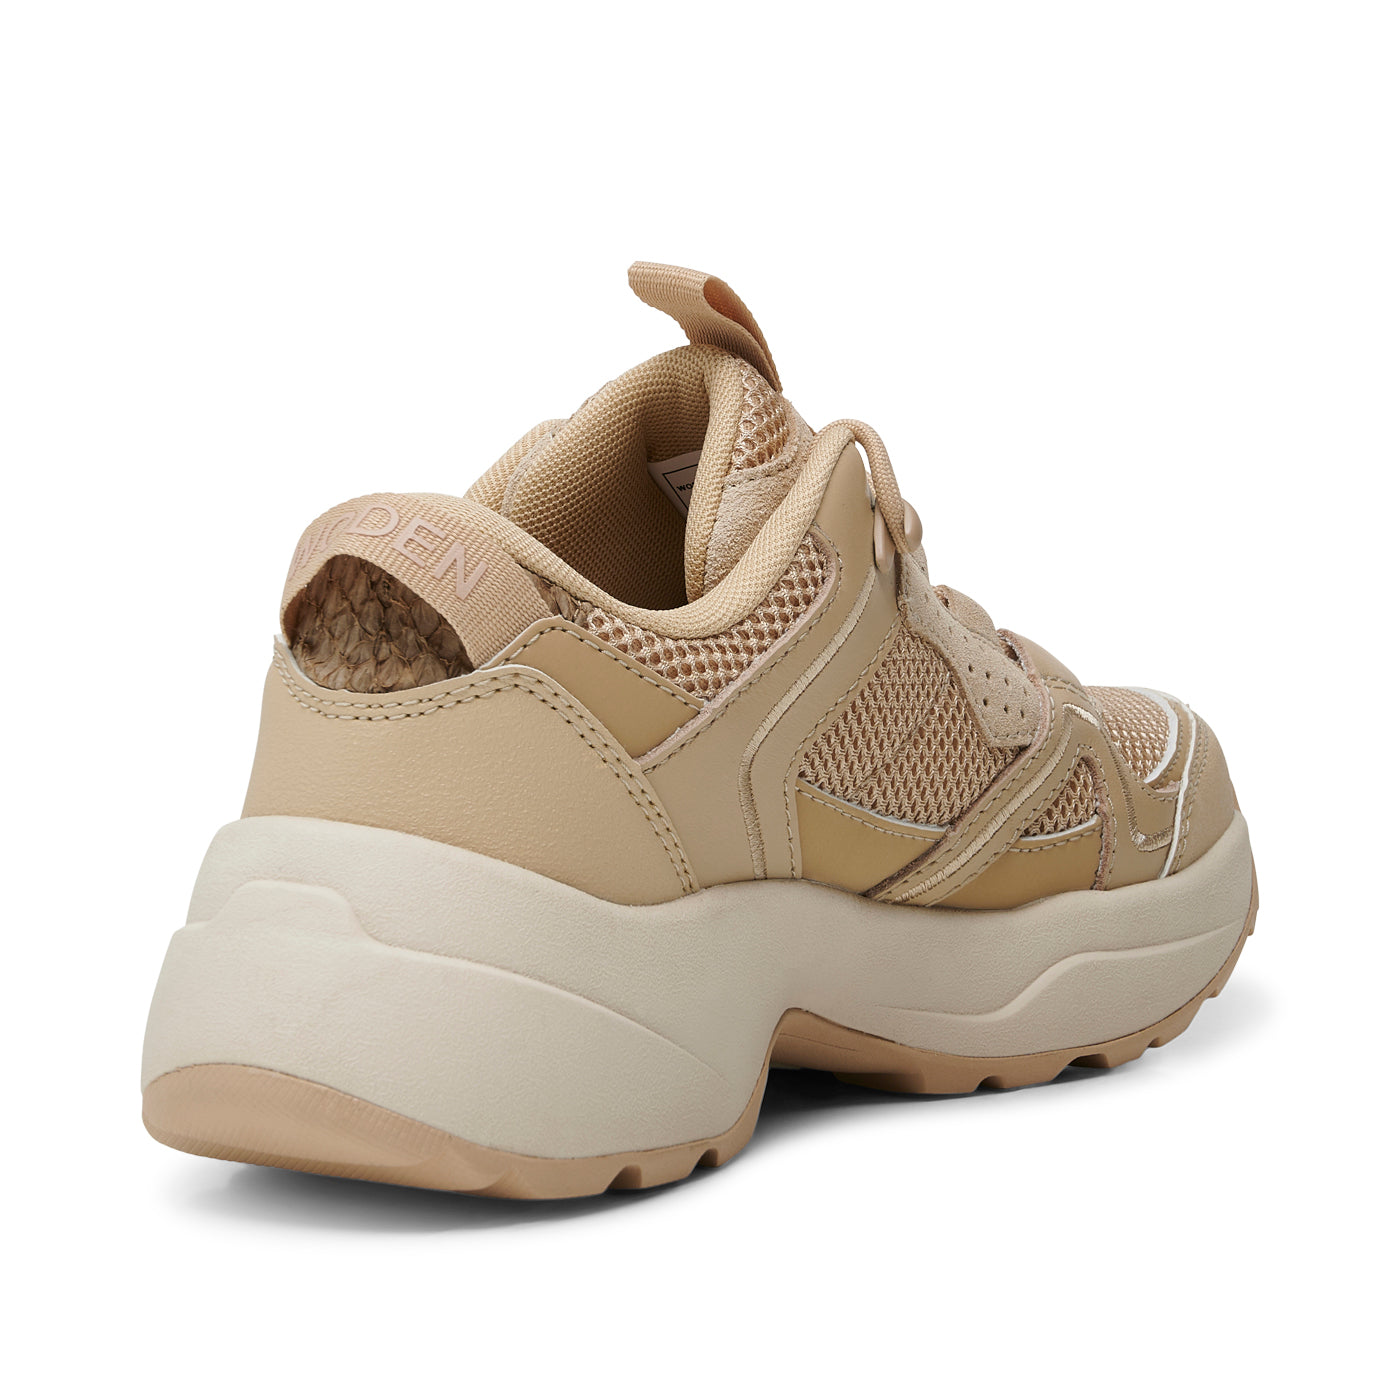 WODEN Sif Reflective Sneakers 852 Coffee Cream